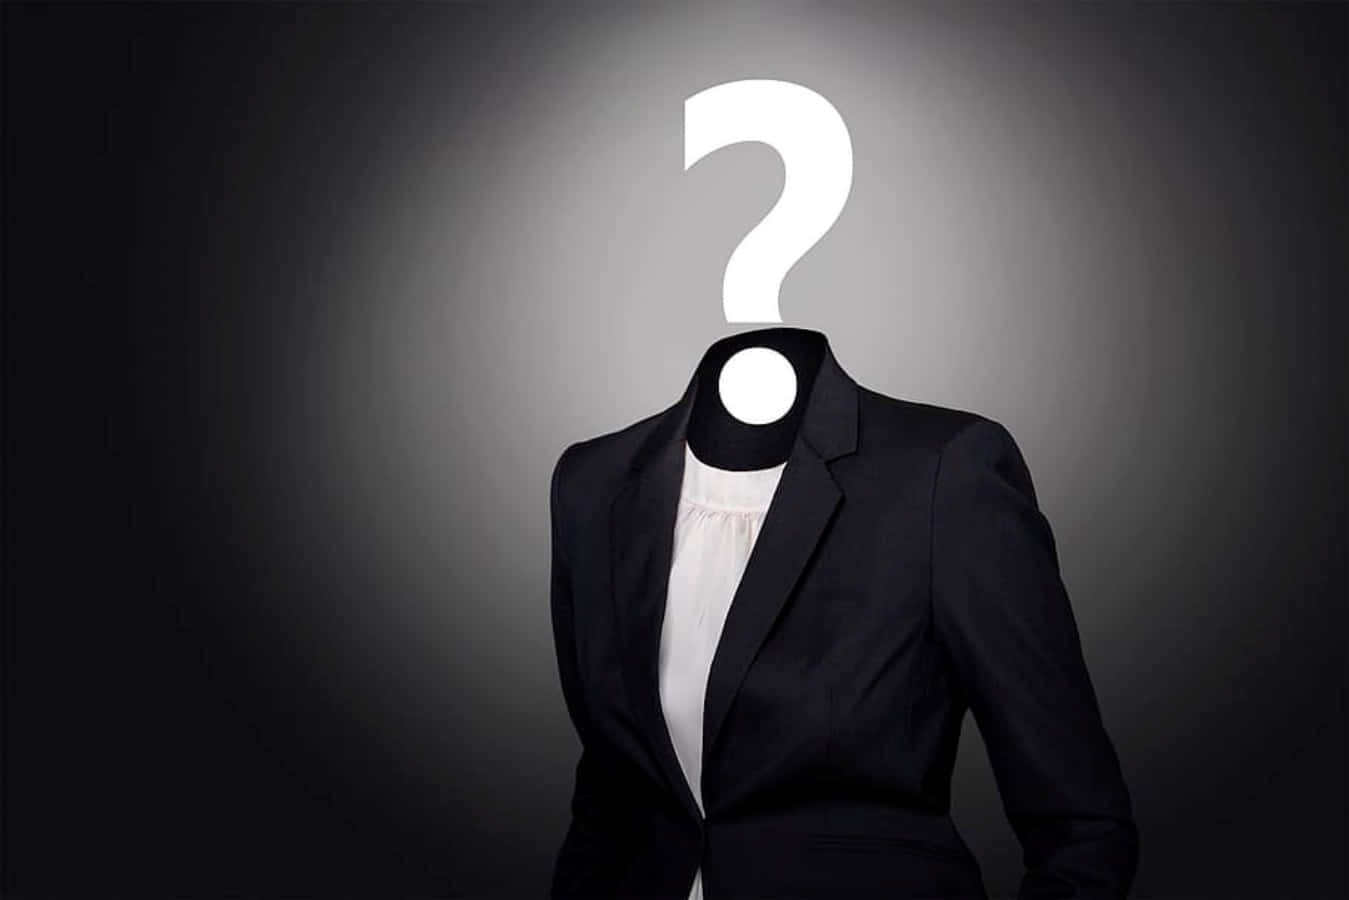 A Woman In A Suit With A Question Mark On Her Head